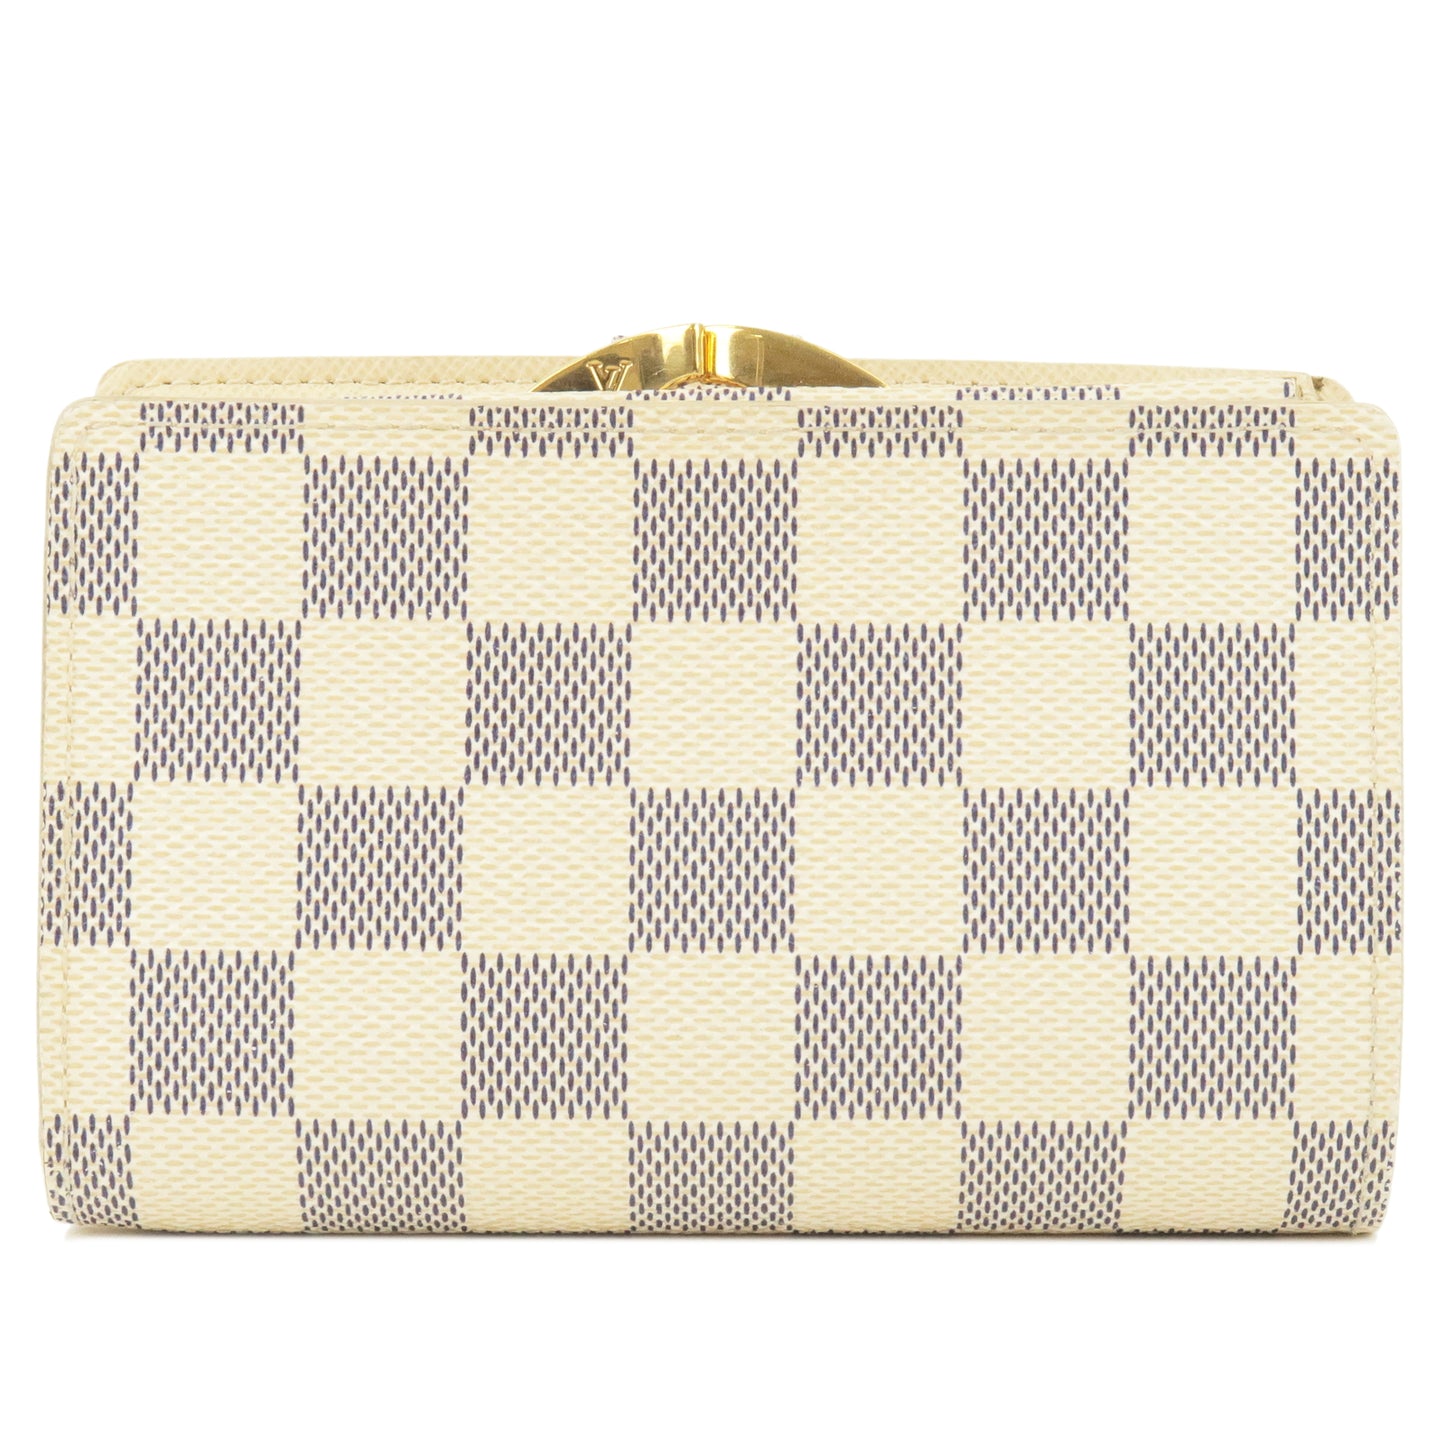 Louis Vuitton Damier Azur Portefeuille Viennois Wallet N61676 Used from  Japan